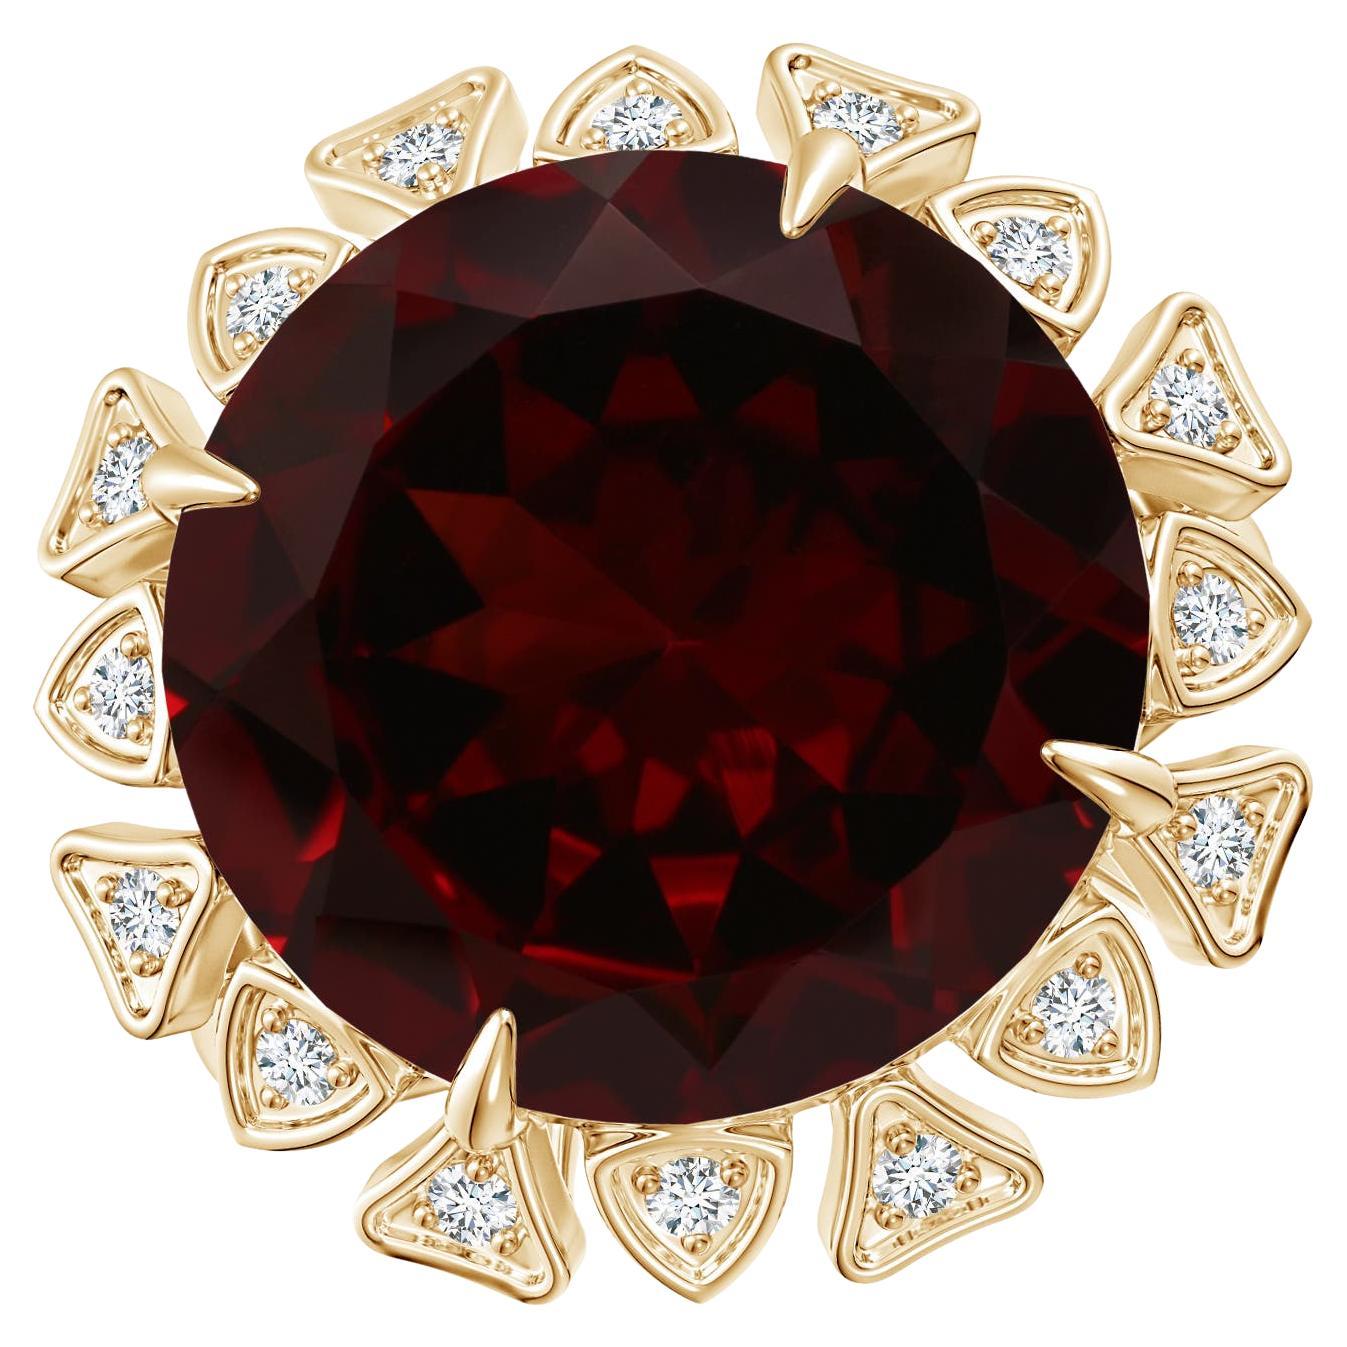 For Sale:  Angara Gia Certified Natural Garnet Yellow Gold Ring with Triangular Motif Halo